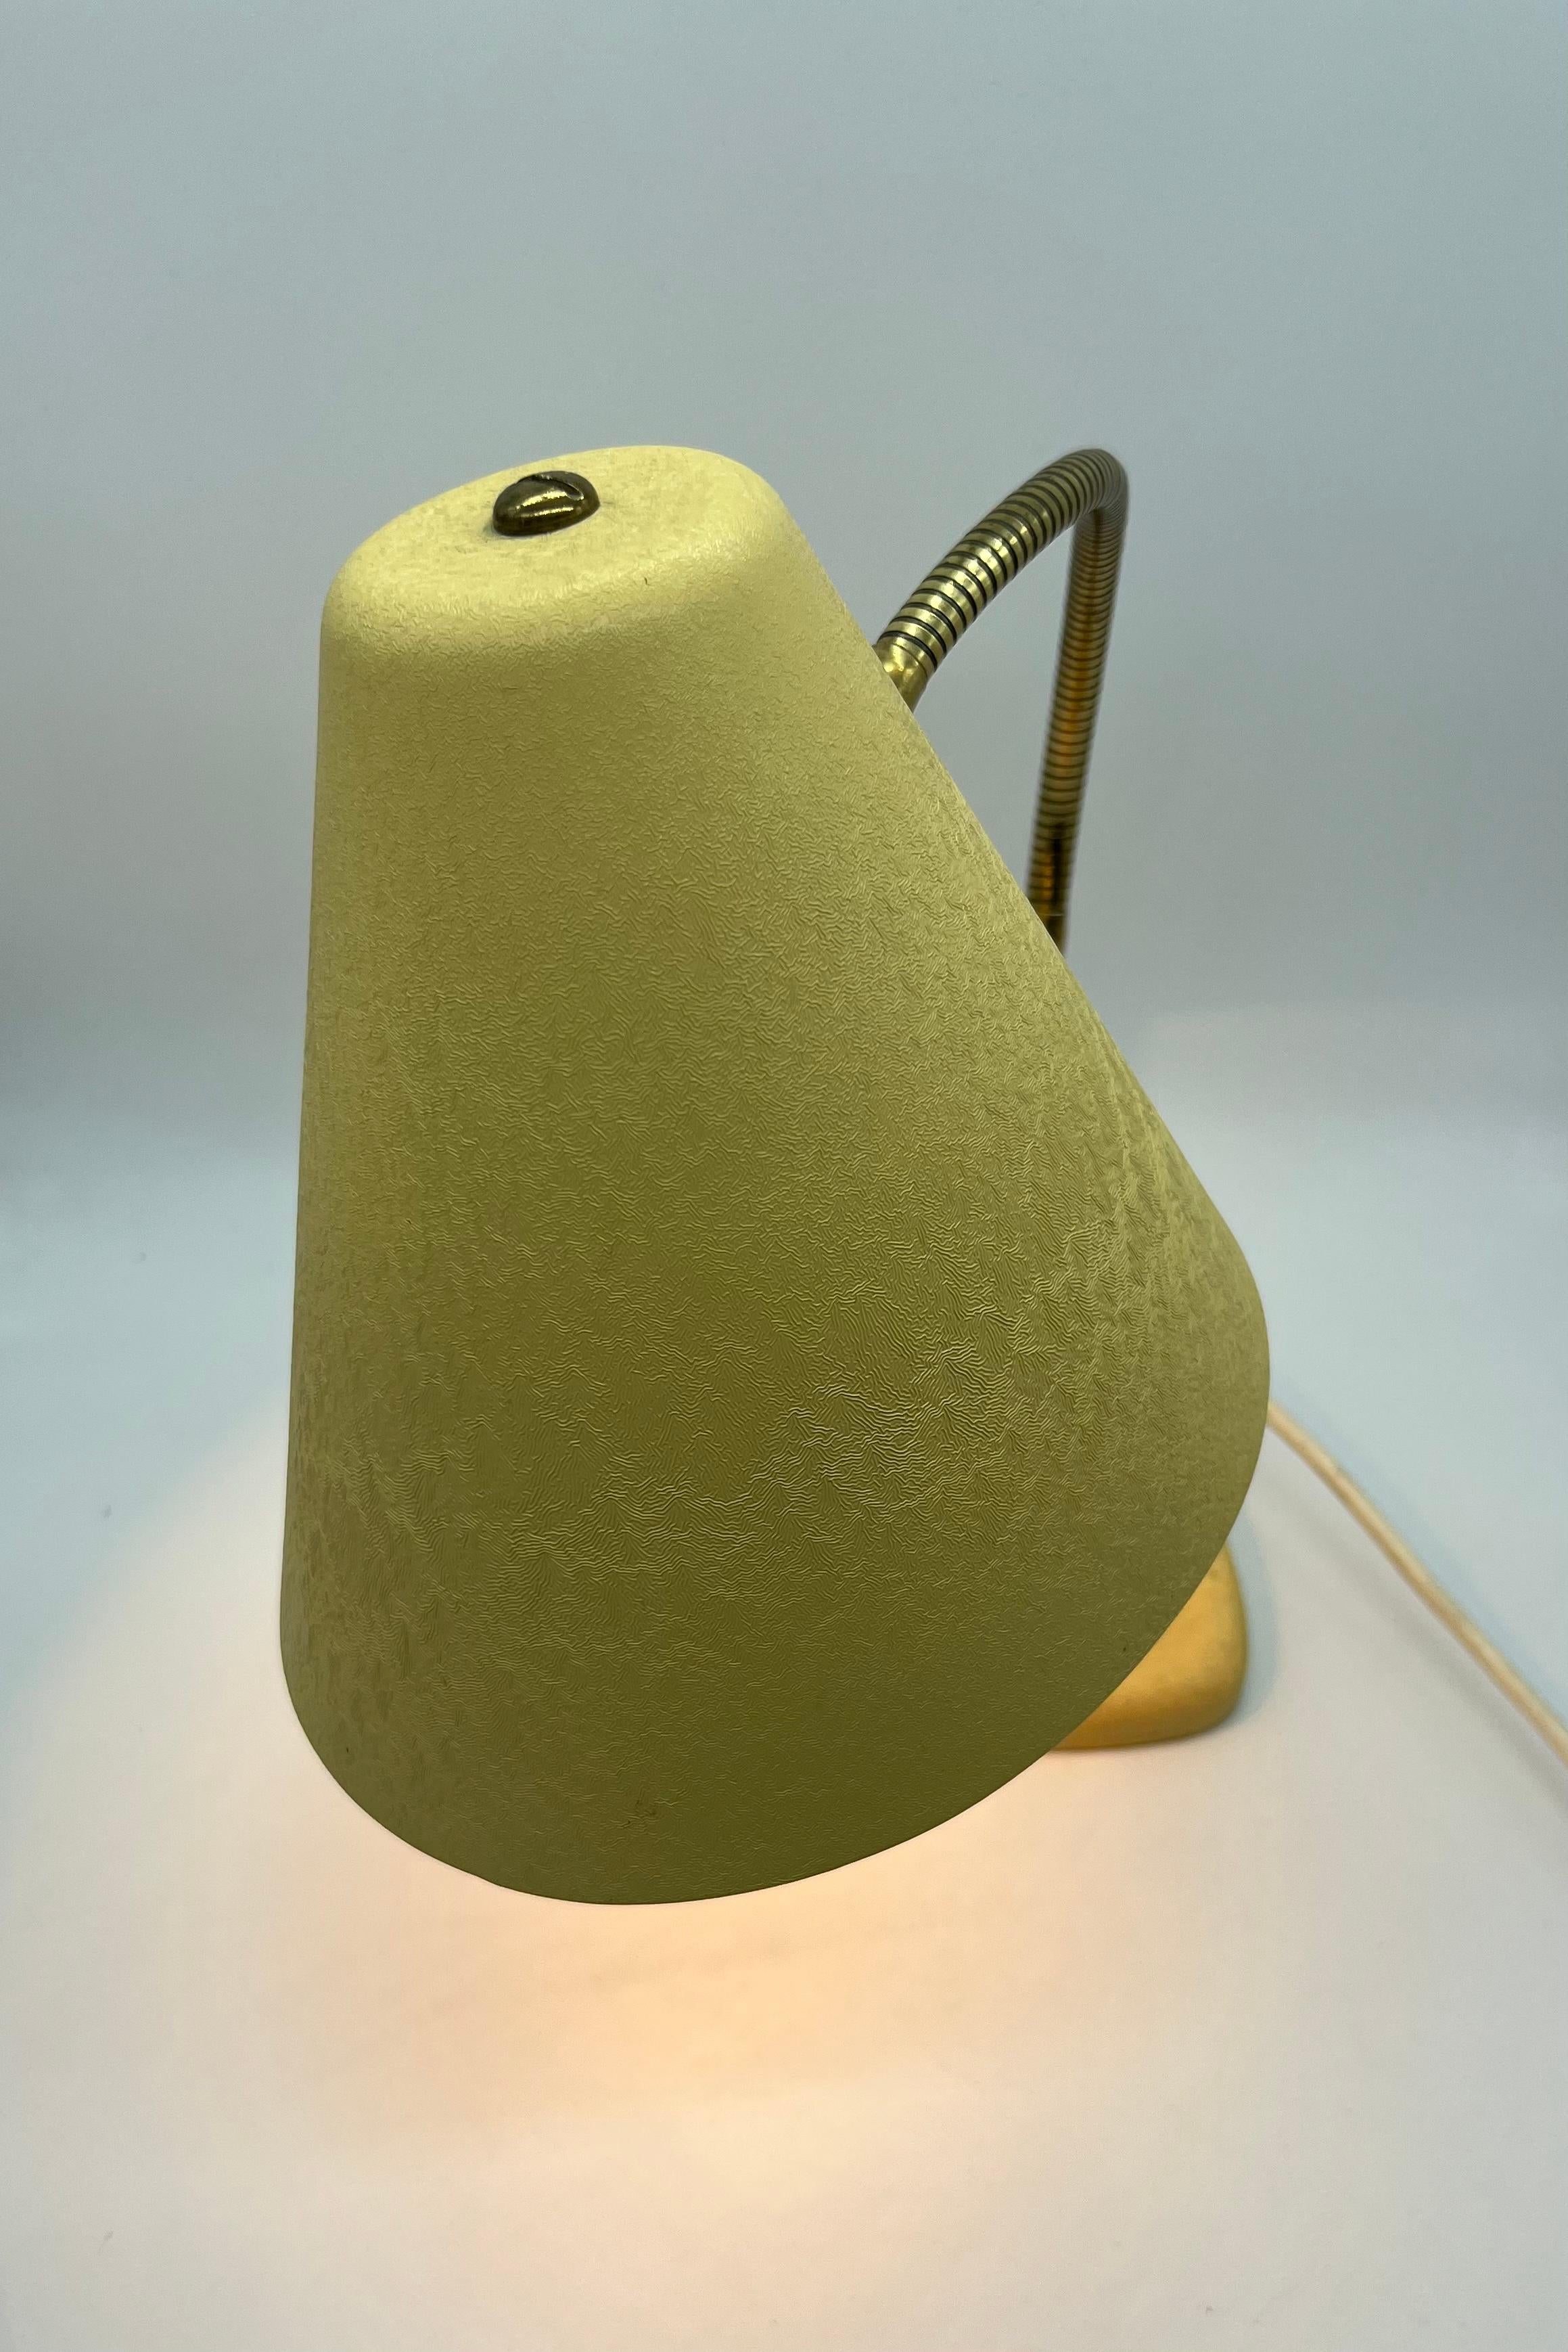 Yellow Table Lamp with Shrink Varnish and Movable Shade, Mid-20th Century For Sale 6